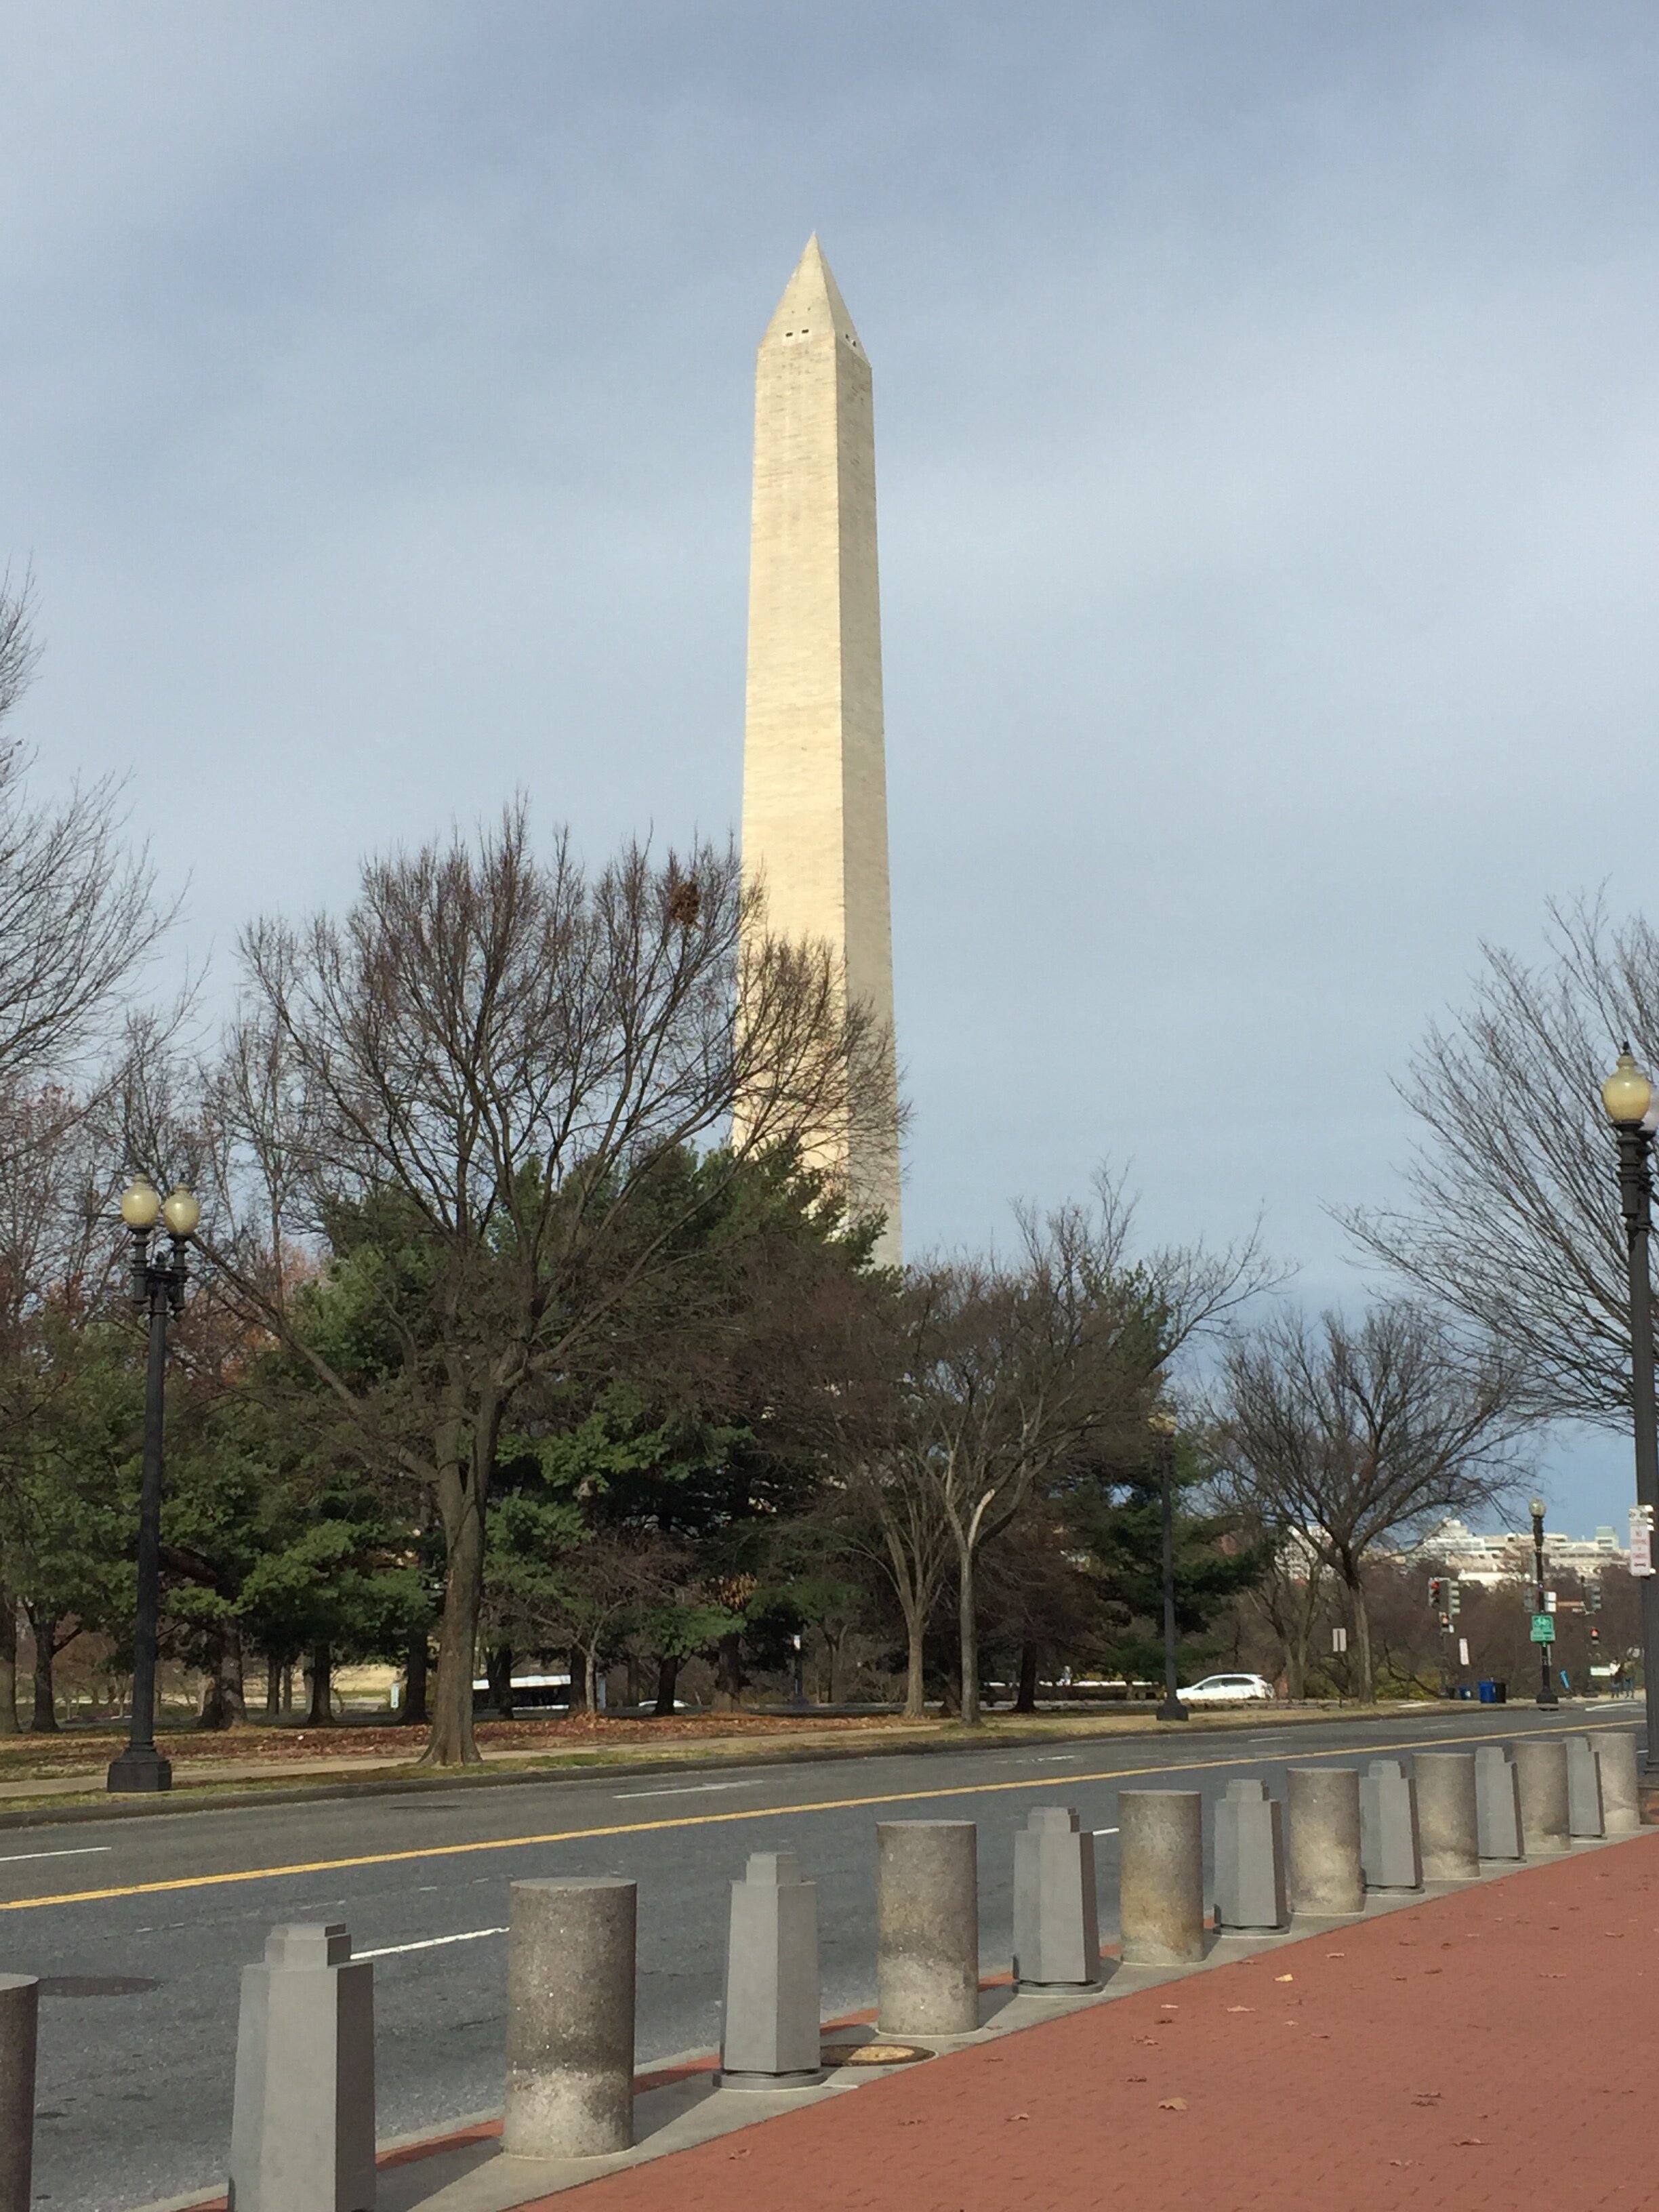 Washington Monument, in DC, finally visa appointment.